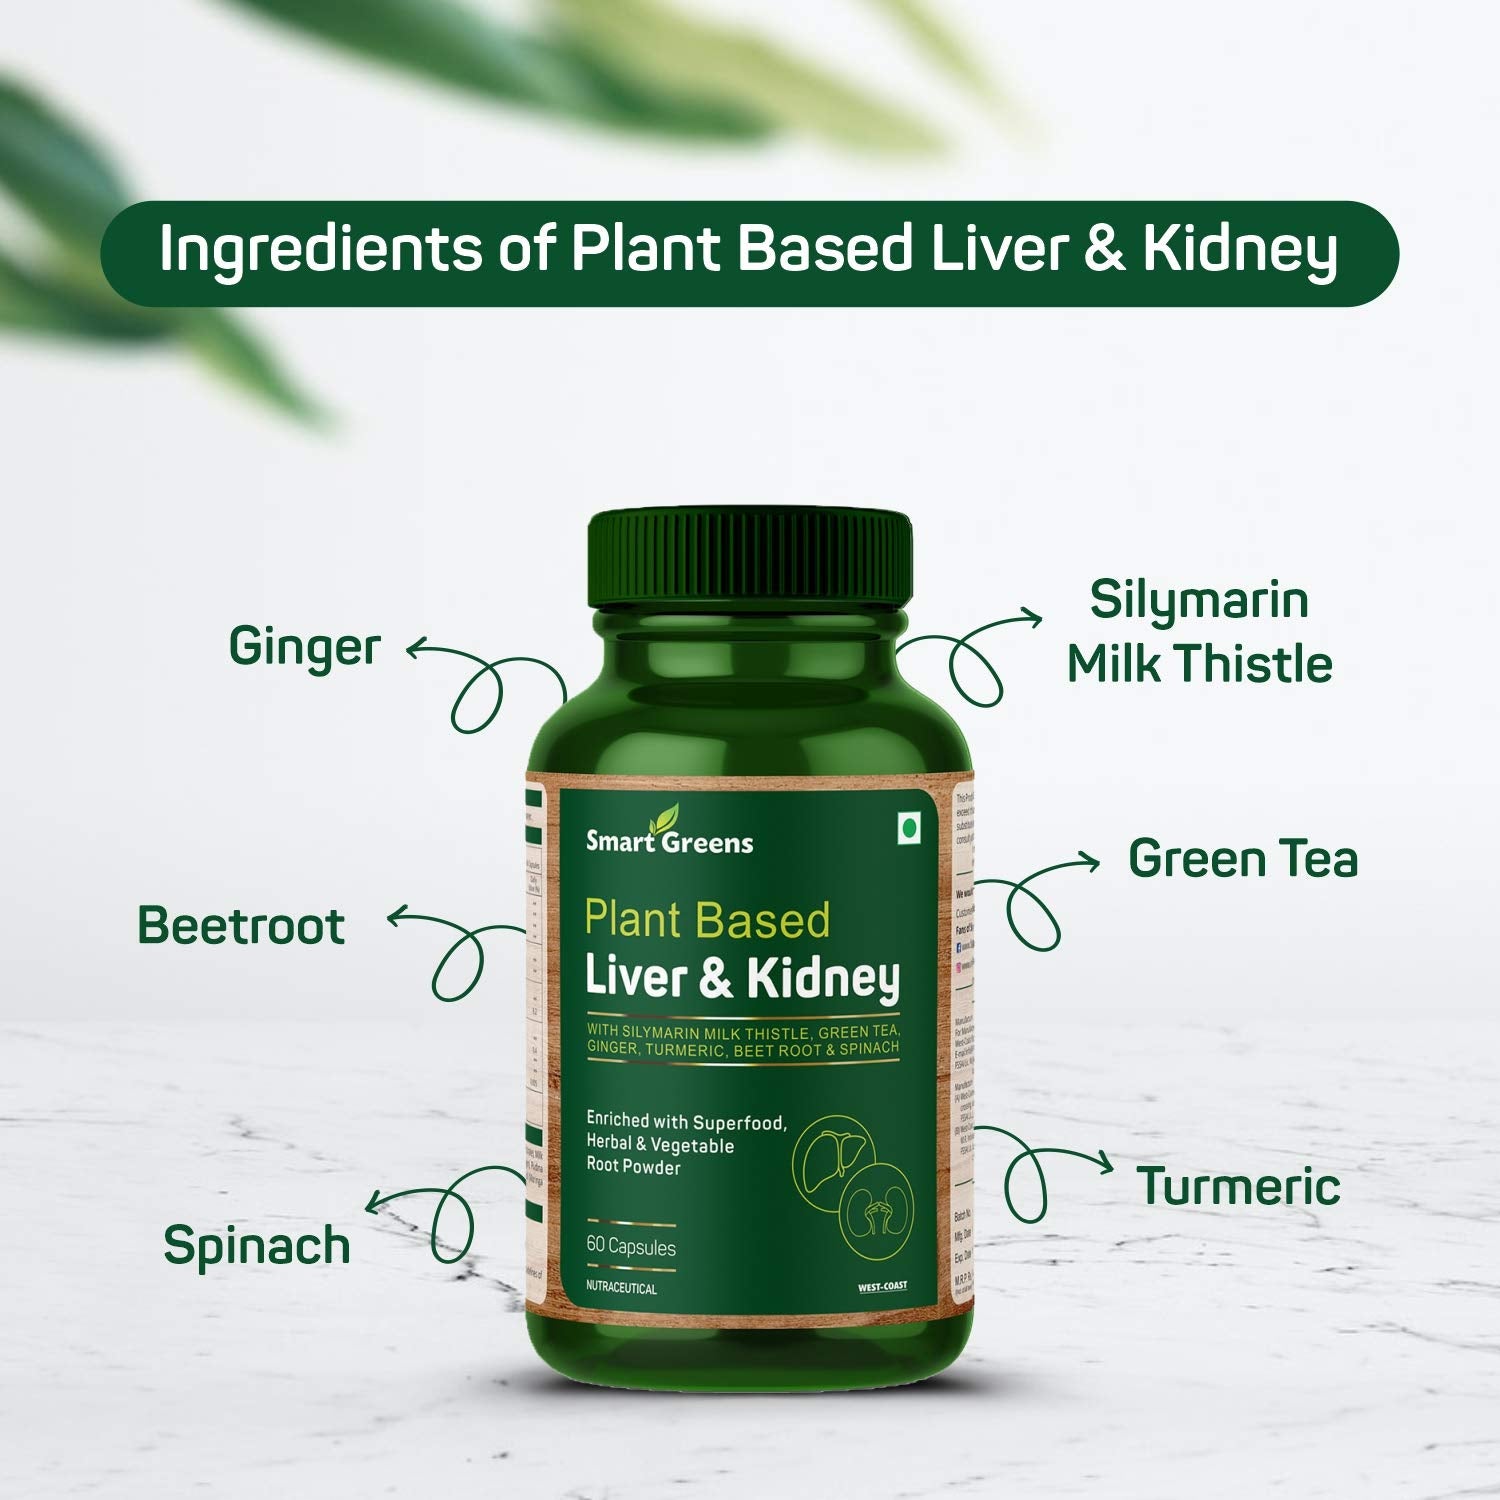 Smart Greens Plant Based Liver & Kidney Enriched with Silymarin Milk Thistle, Green Tea, Ginger, Turmeric, Beetroot & Spinach – 60 Capsules